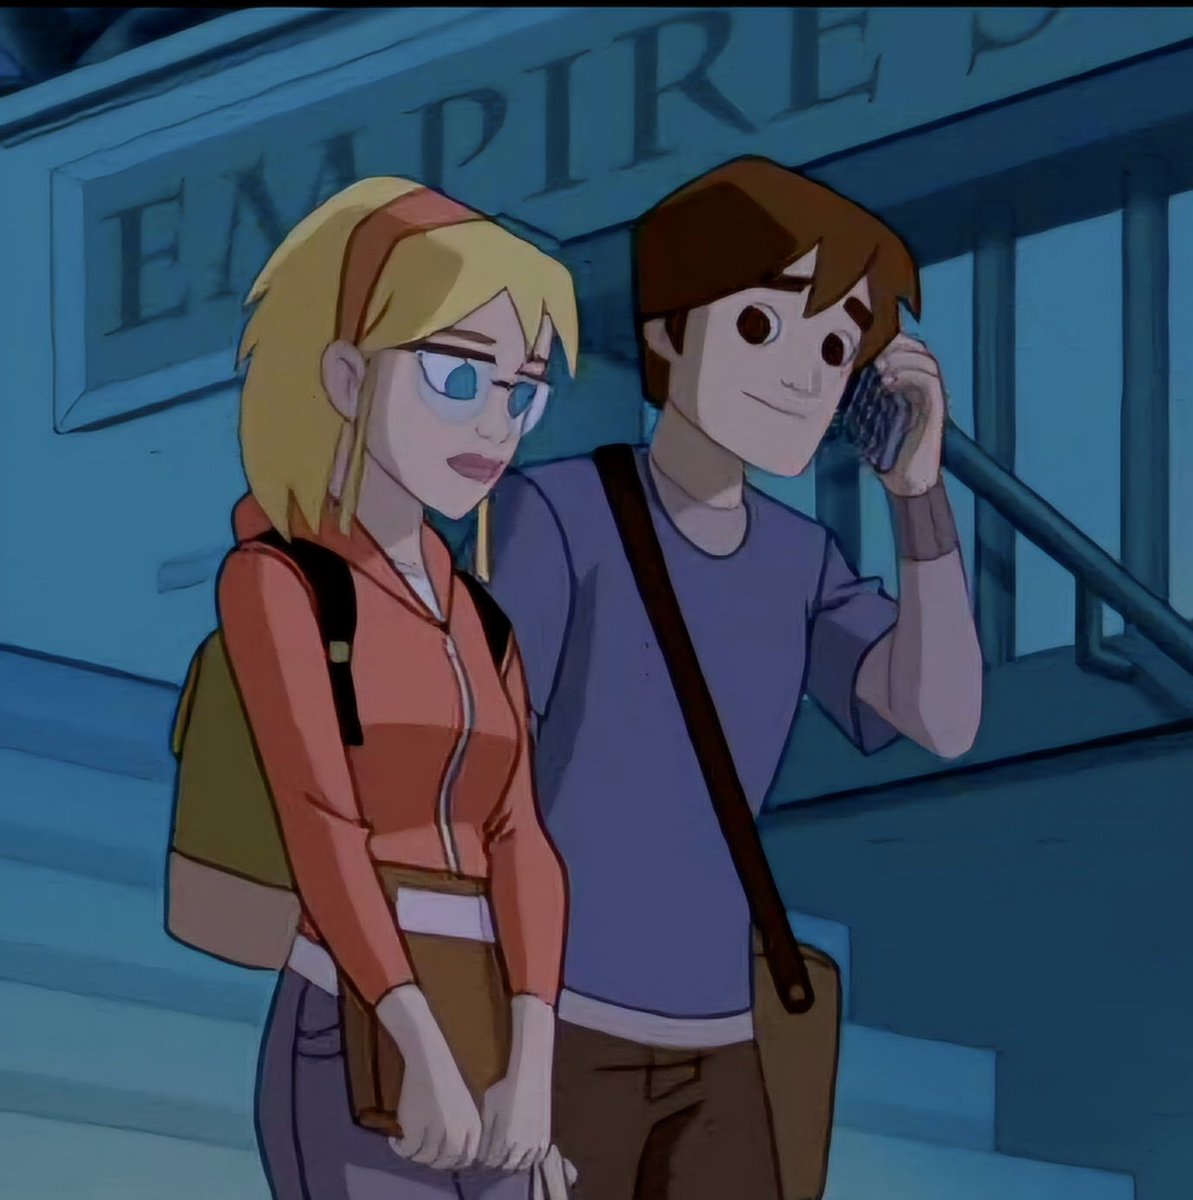 On the Left is Star and Marco age 16...
LOOK FAMILIAR??
#StarVsTheForcesOfEvil #spectacularspiderman #canonevent #disneyxd #Marvel